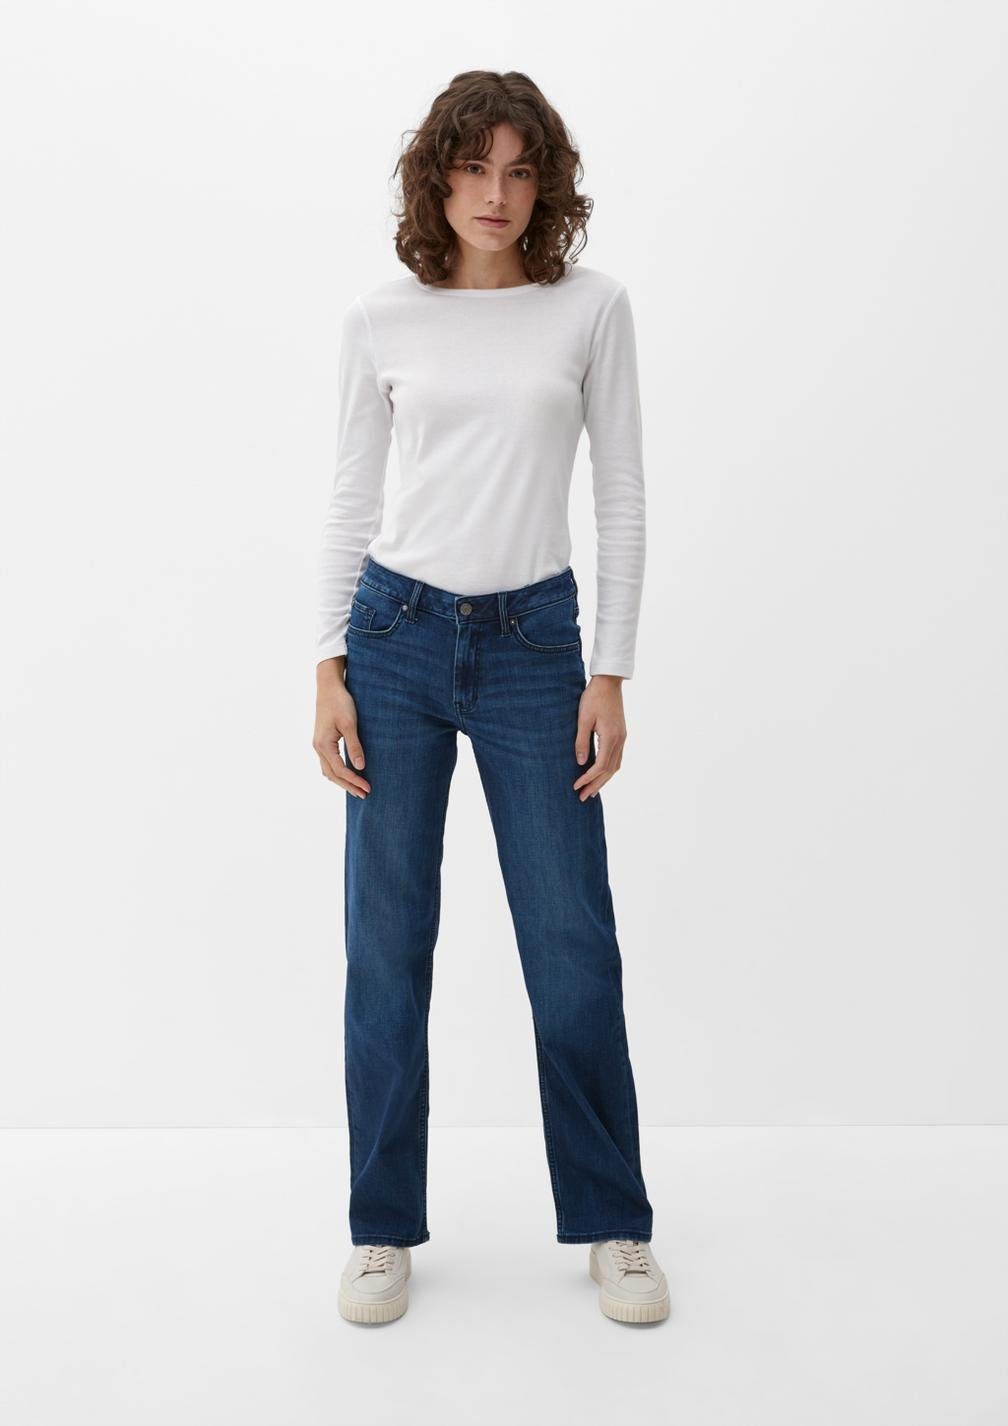 s.Oliver Comfort-fit-Jeans / Leg KAROLIN Fit Relaxed / Straight leichter tiefblau rise mit Waschung, Mid